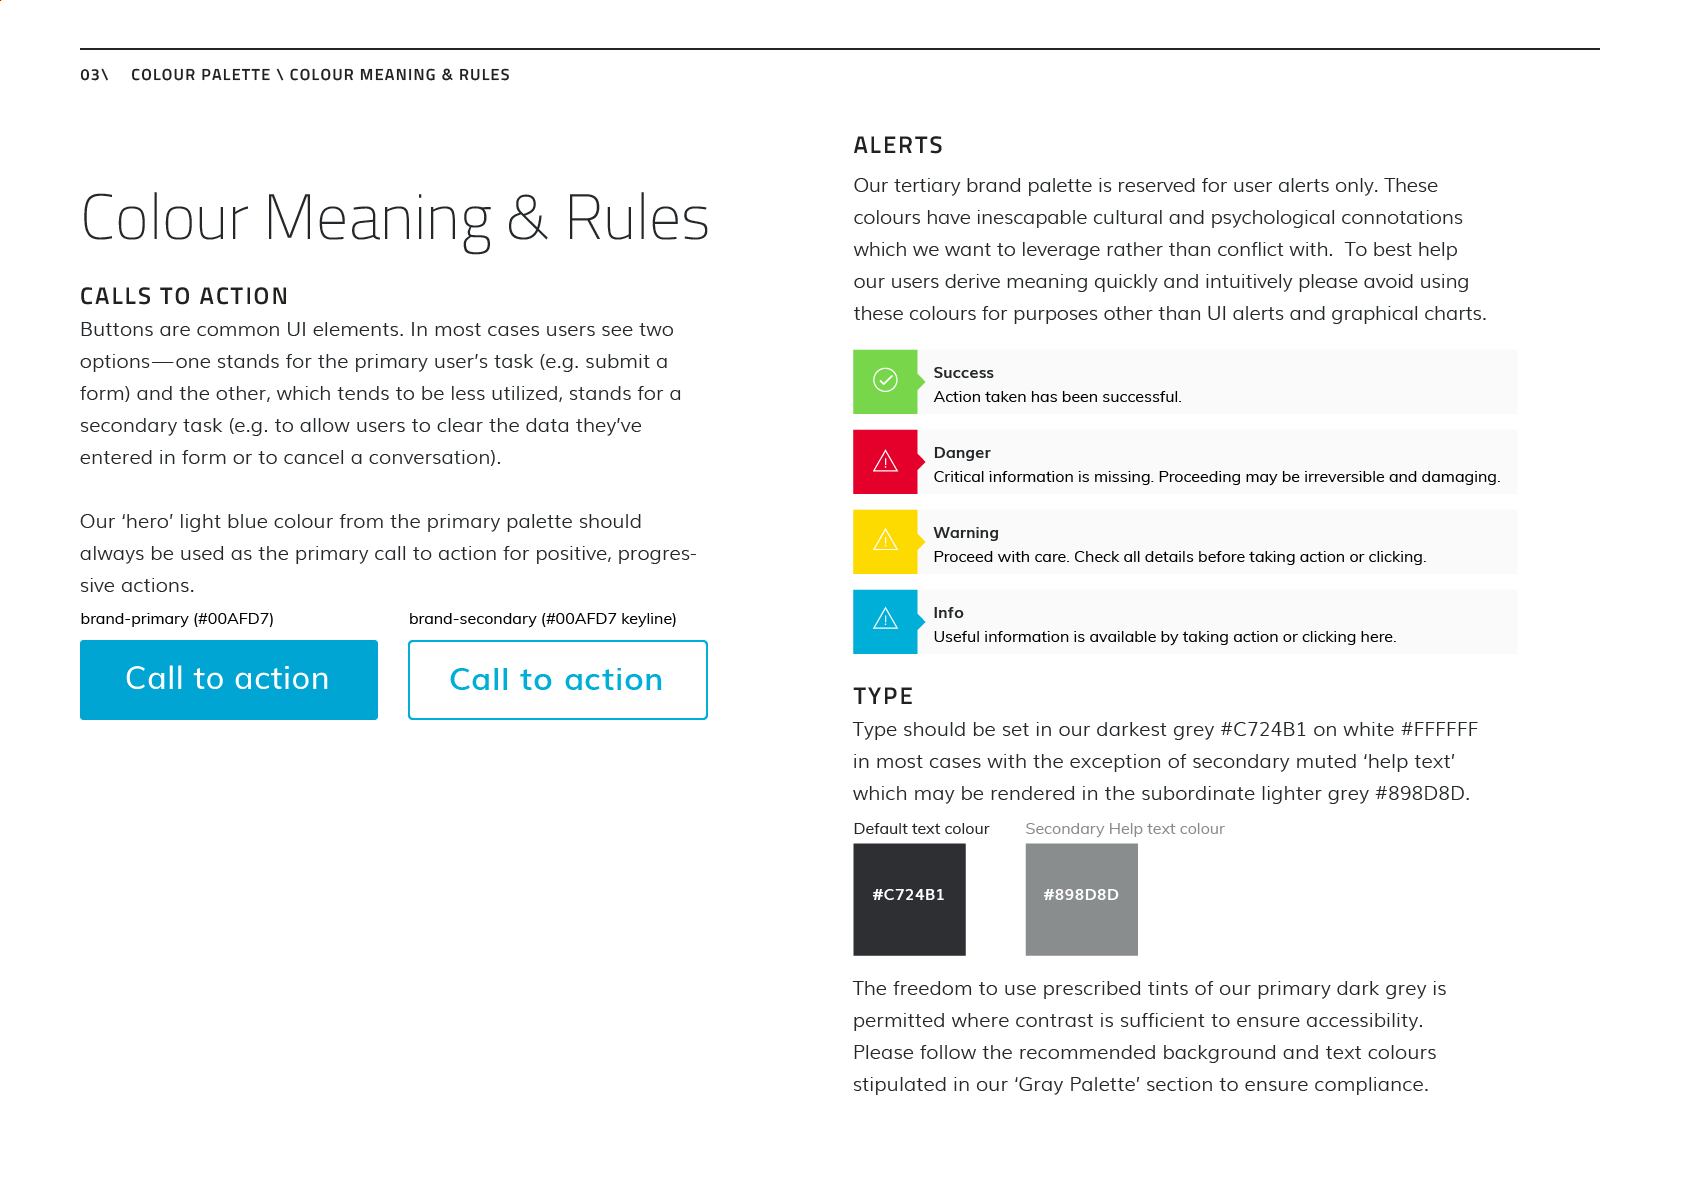 Colour Meaning & Rules